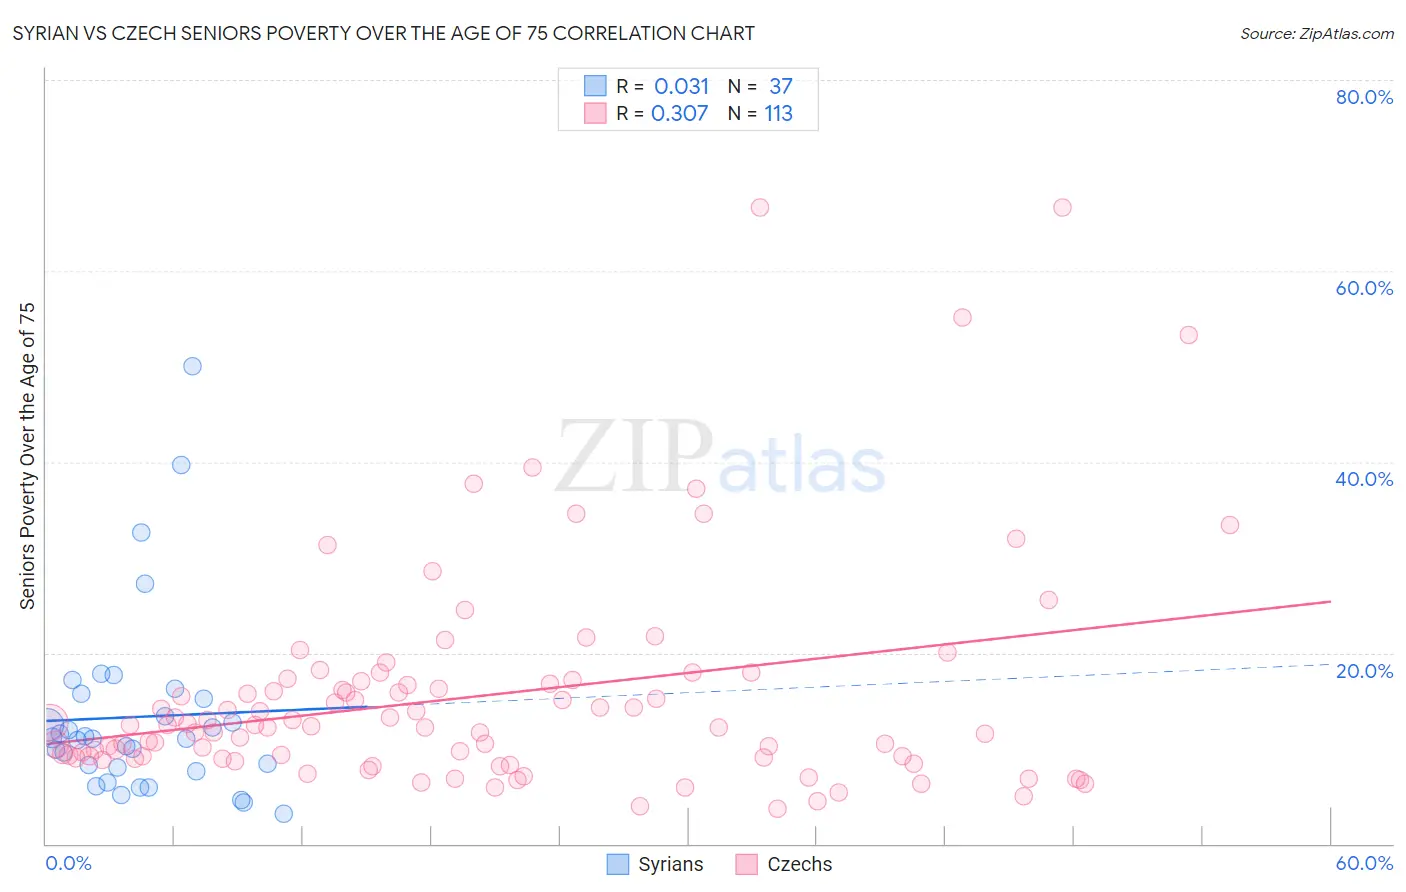 Syrian vs Czech Seniors Poverty Over the Age of 75